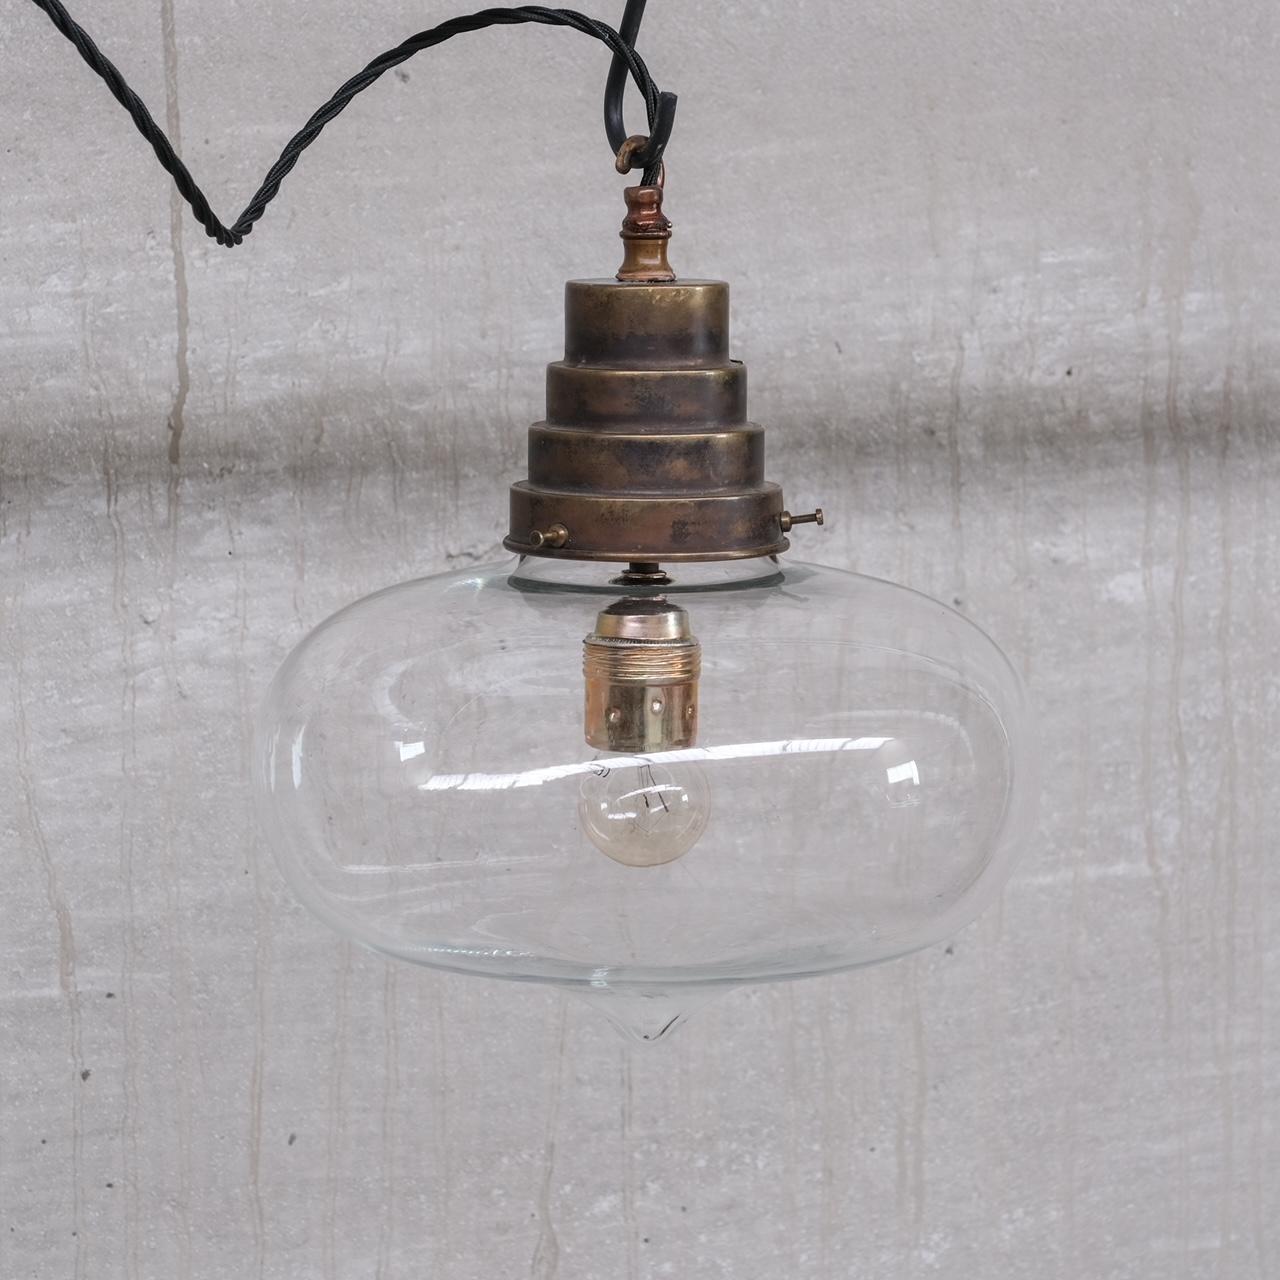 A clear tear drop pendant light.

France, circa 1950s.

Stepped brass gallery.

Good condition.

Re-wired and PAT tested.

No original chain or rose was retained but these can be sourced easily online.

Location: Belgium